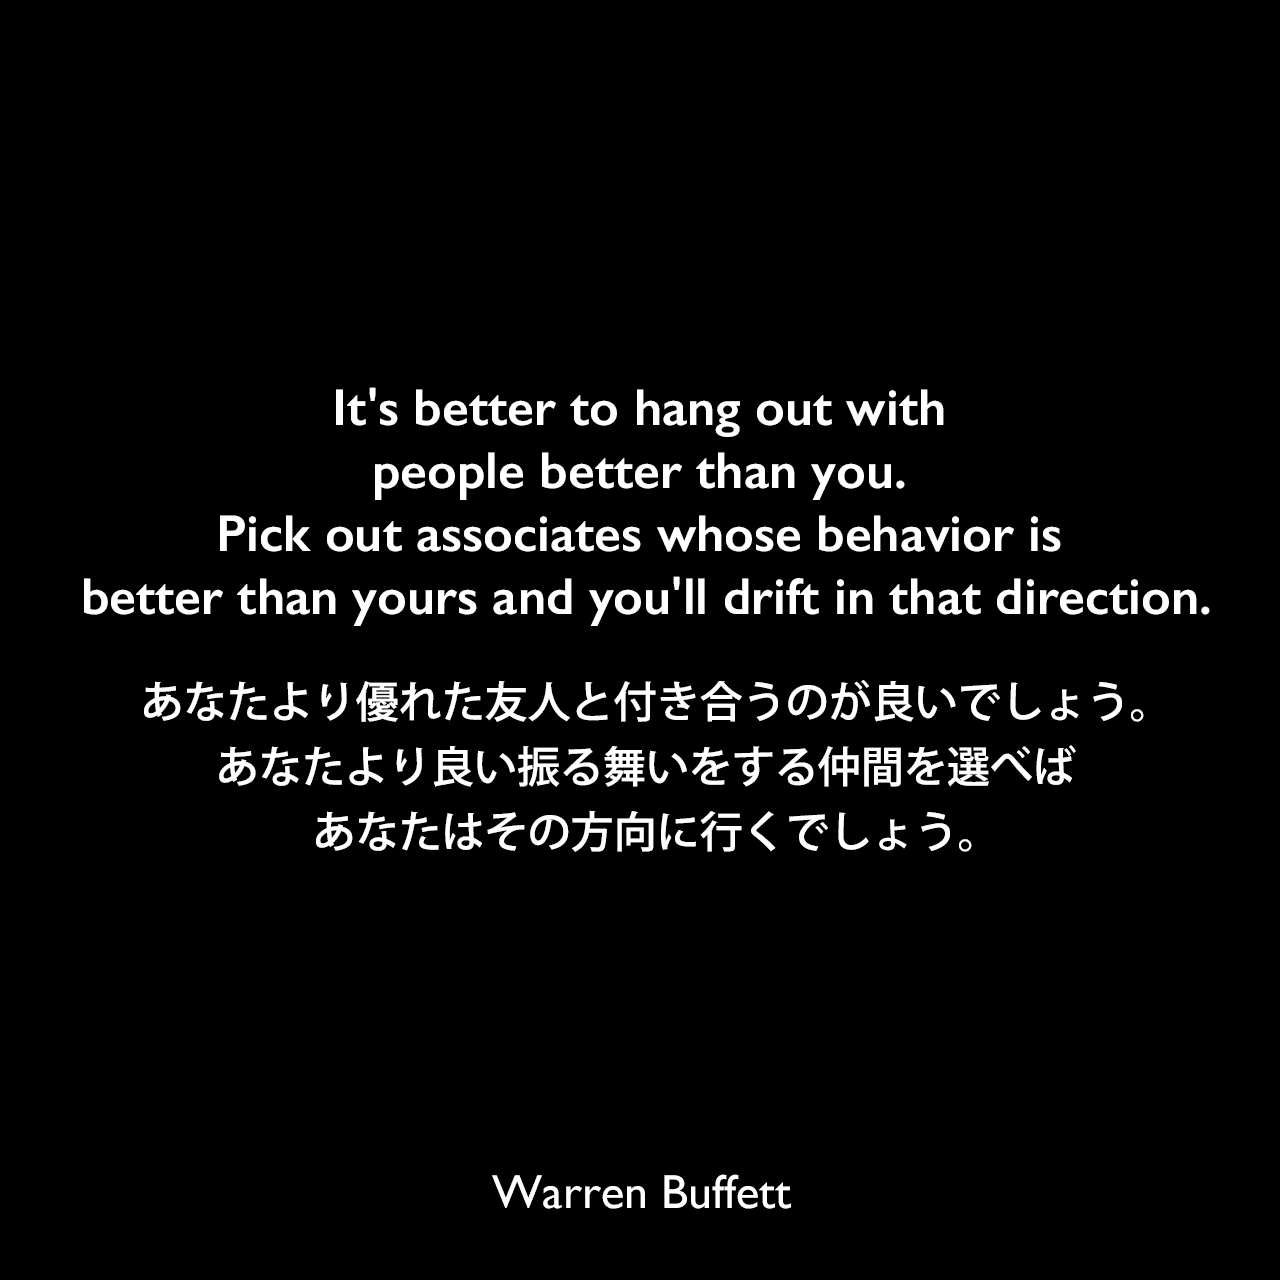 It's better to hang out with people better than you. Pick out associates whose behavior is better than yours and you'll drift in that direction.あなたより優れた友人と付き合うのが良いでしょう。あなたより良い振る舞いをする仲間を選べば、あなたはその方向に行くでしょう。Warren Buffett